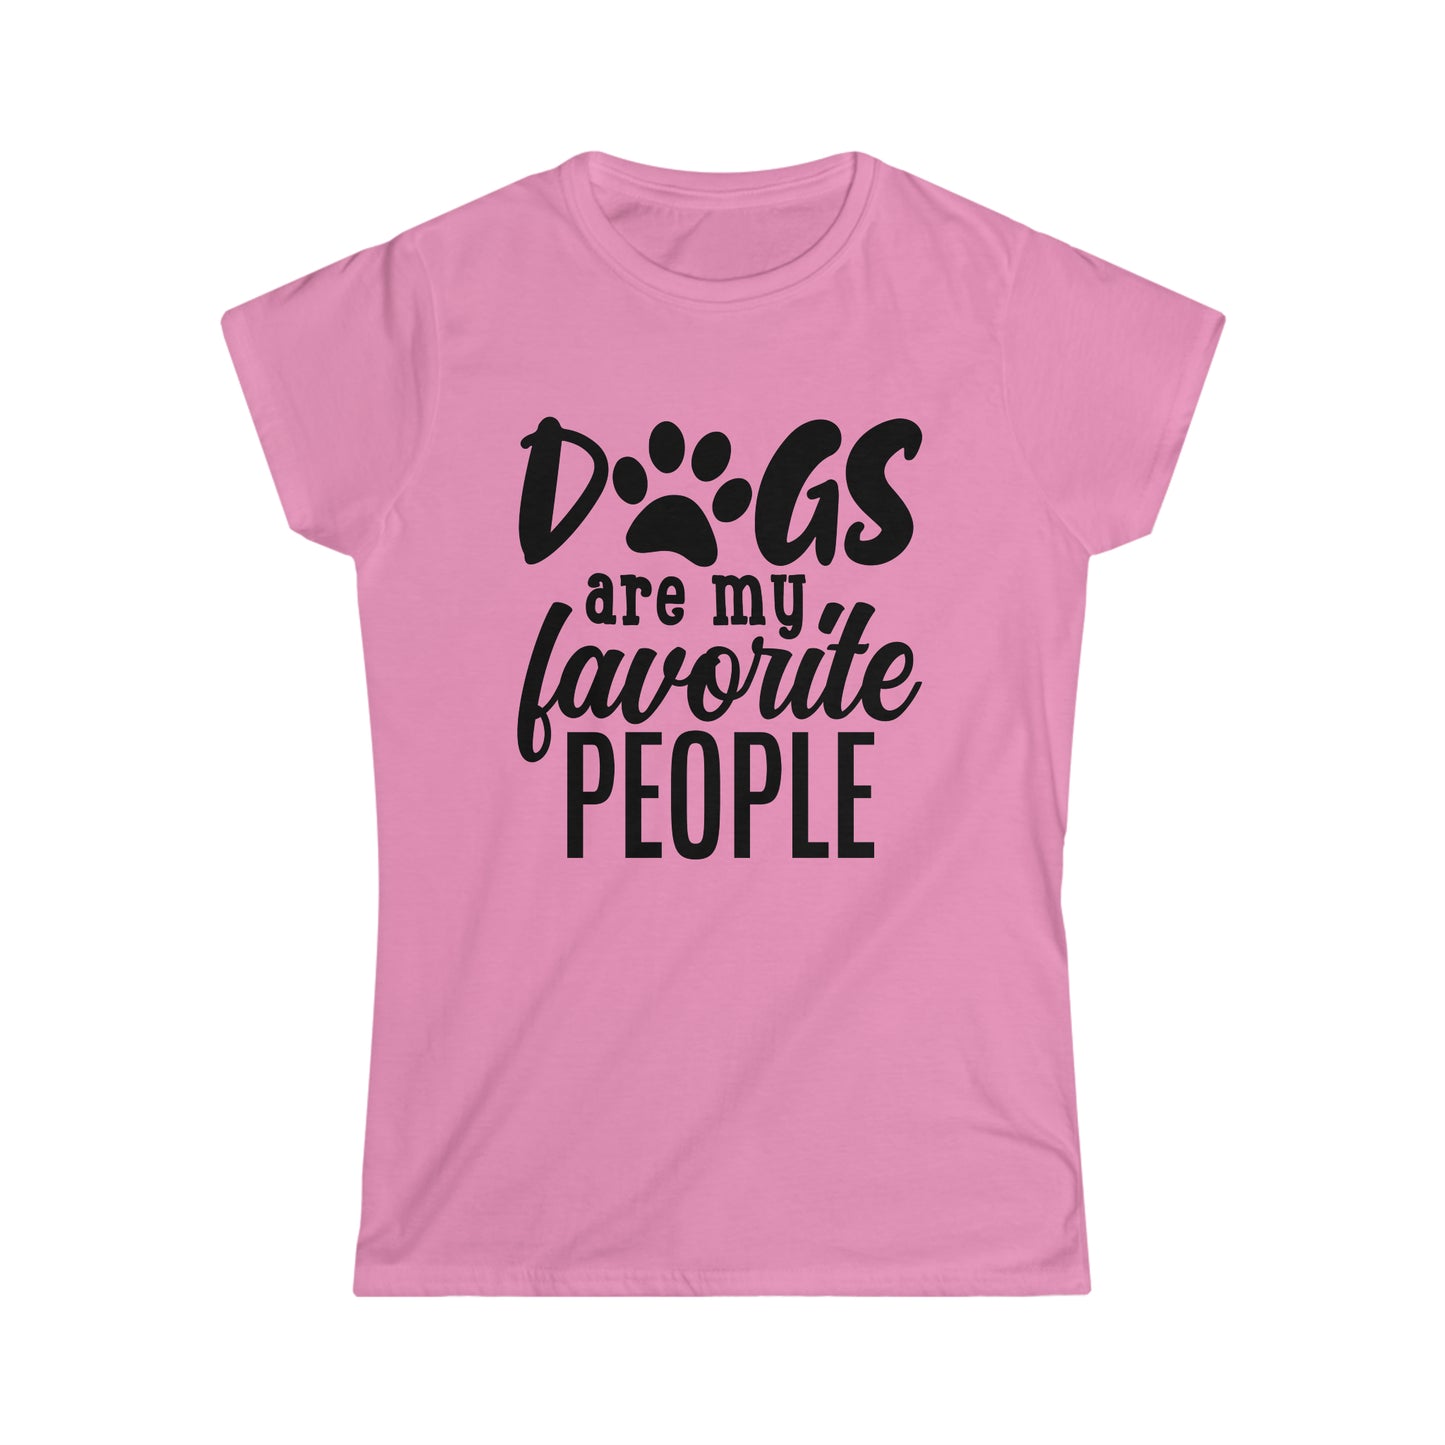 "Dogs Are My Favorite People" Women's Softstyle Tee